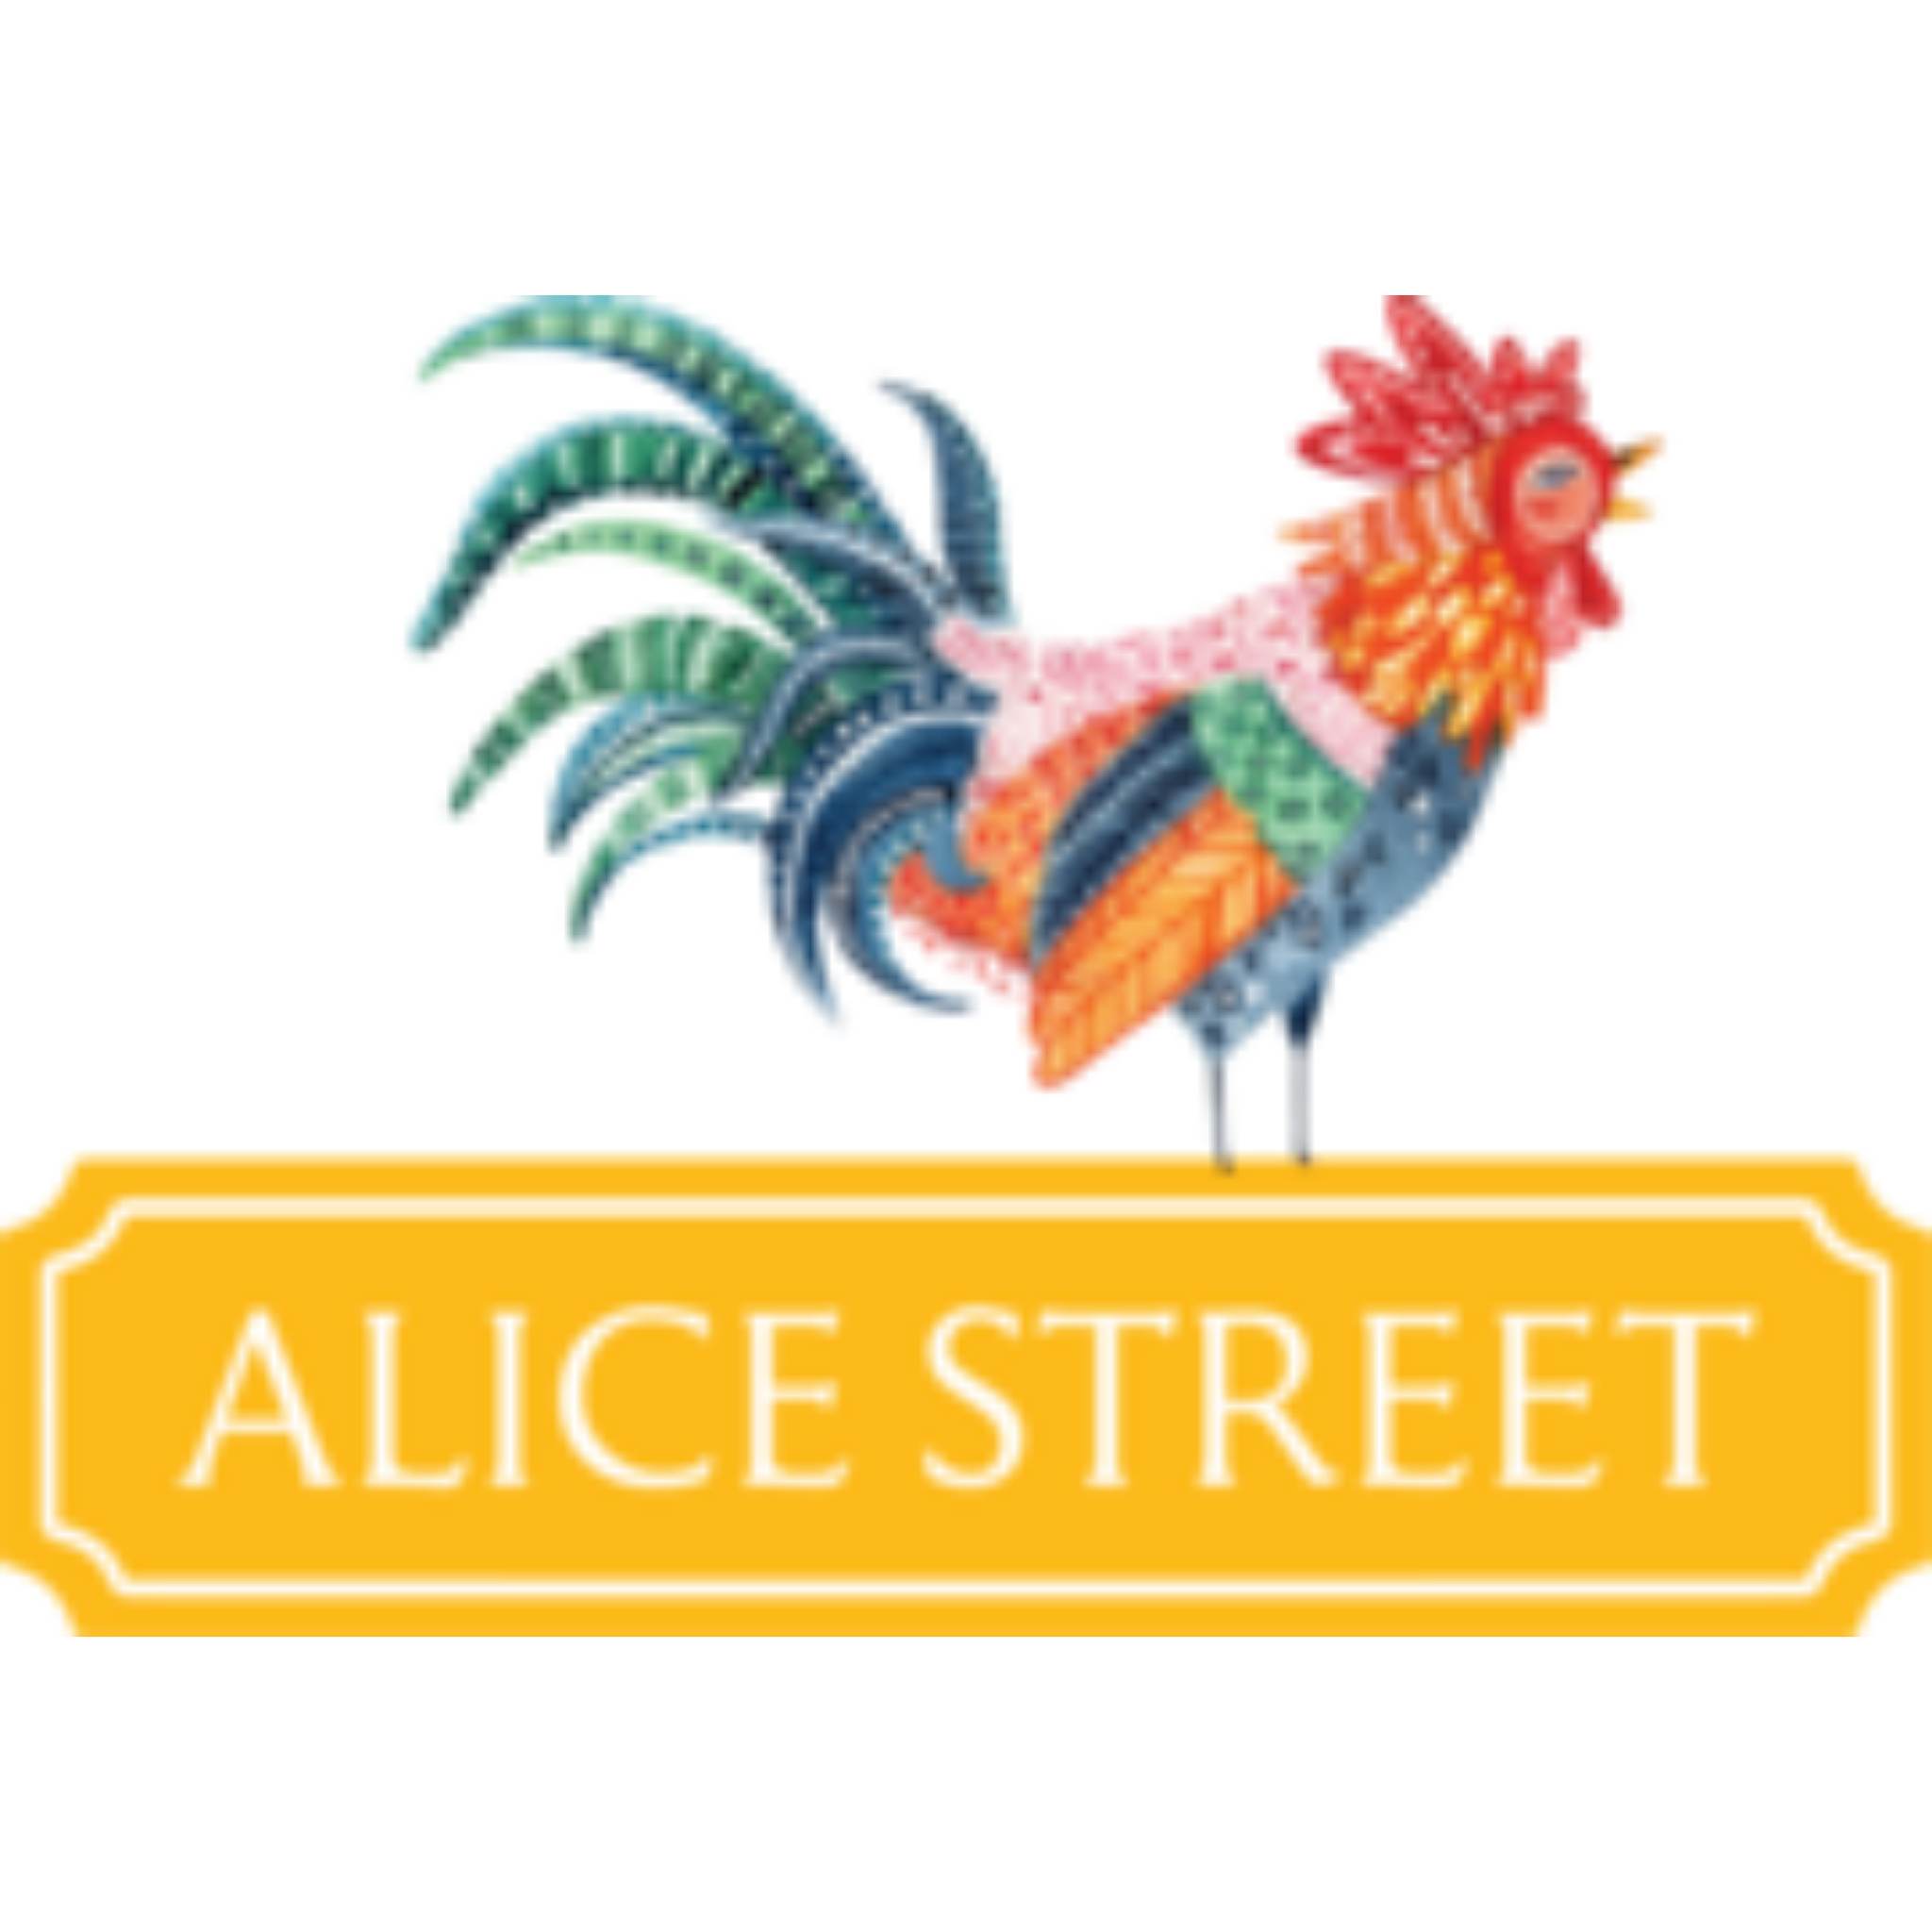 Alice Street: Bringing Back The Art of the Dinner Party